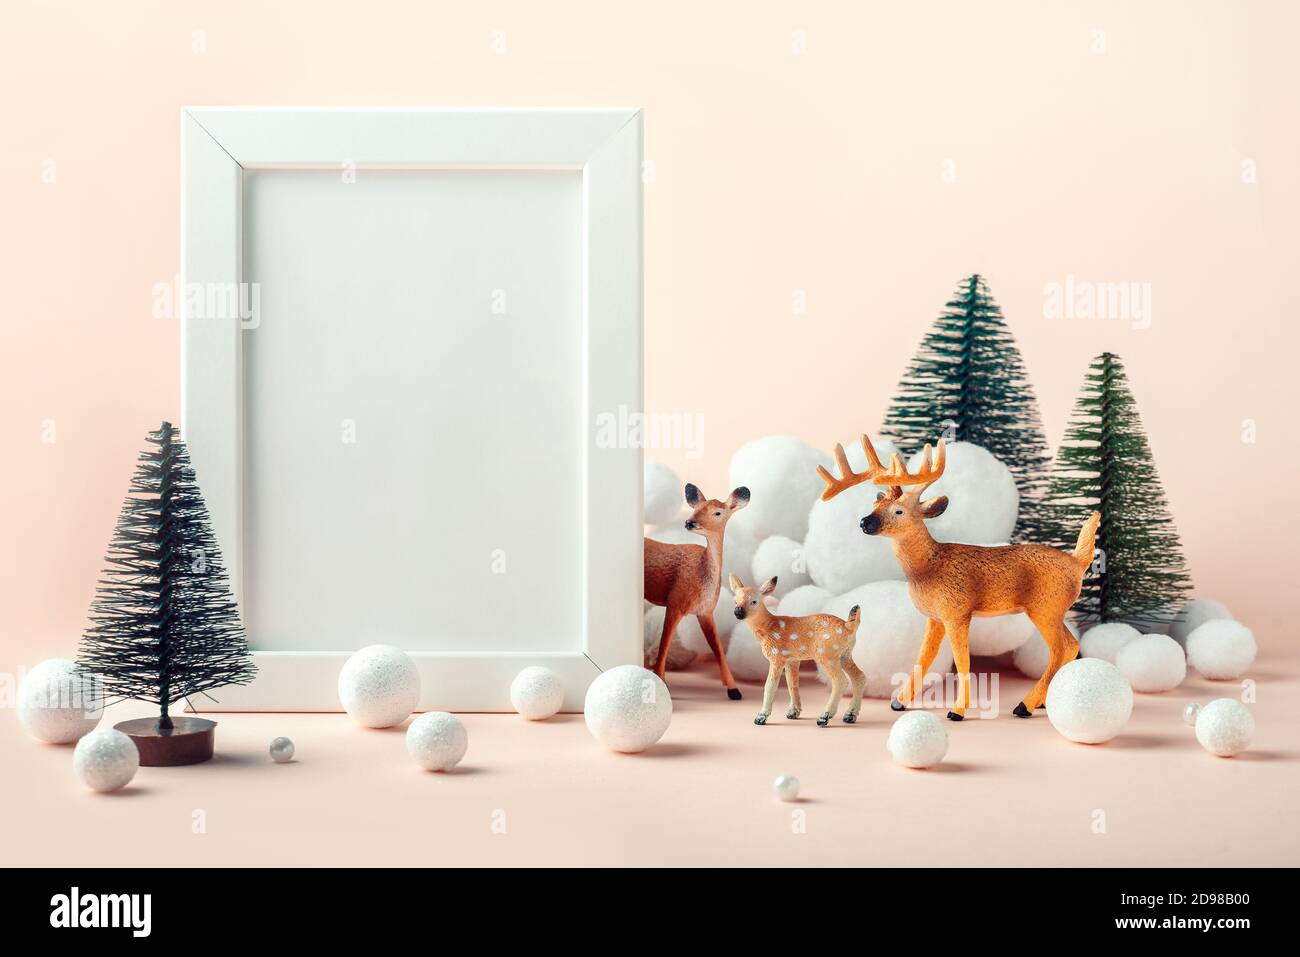 Christmas mockup frame with a decor of deer, fir trees and decorative snow Stock Photo